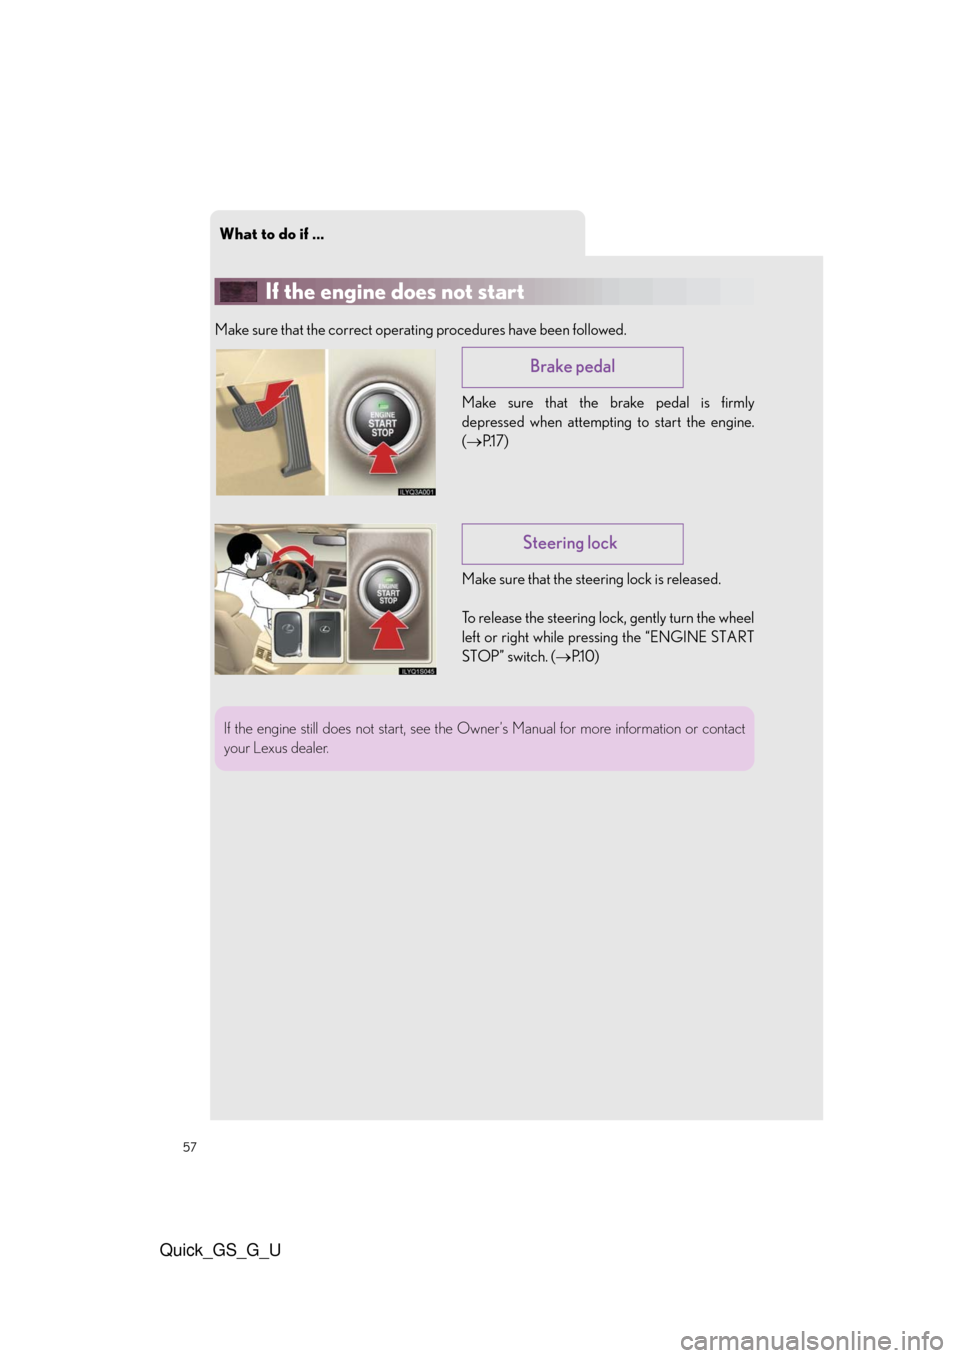 Lexus GS350 2010  Do-It-Yourself Maintenance / LEXUS 2010 GS460/350 QUICK GUIDE OWNERS MANUAL (OM30B76U) What to do if ...
57
Quick_GS_G_U
If the engine does not start
Make sure that the correct operating procedures have been followed.
Make sure that the brake pedal is firmly
depressed when attempting to